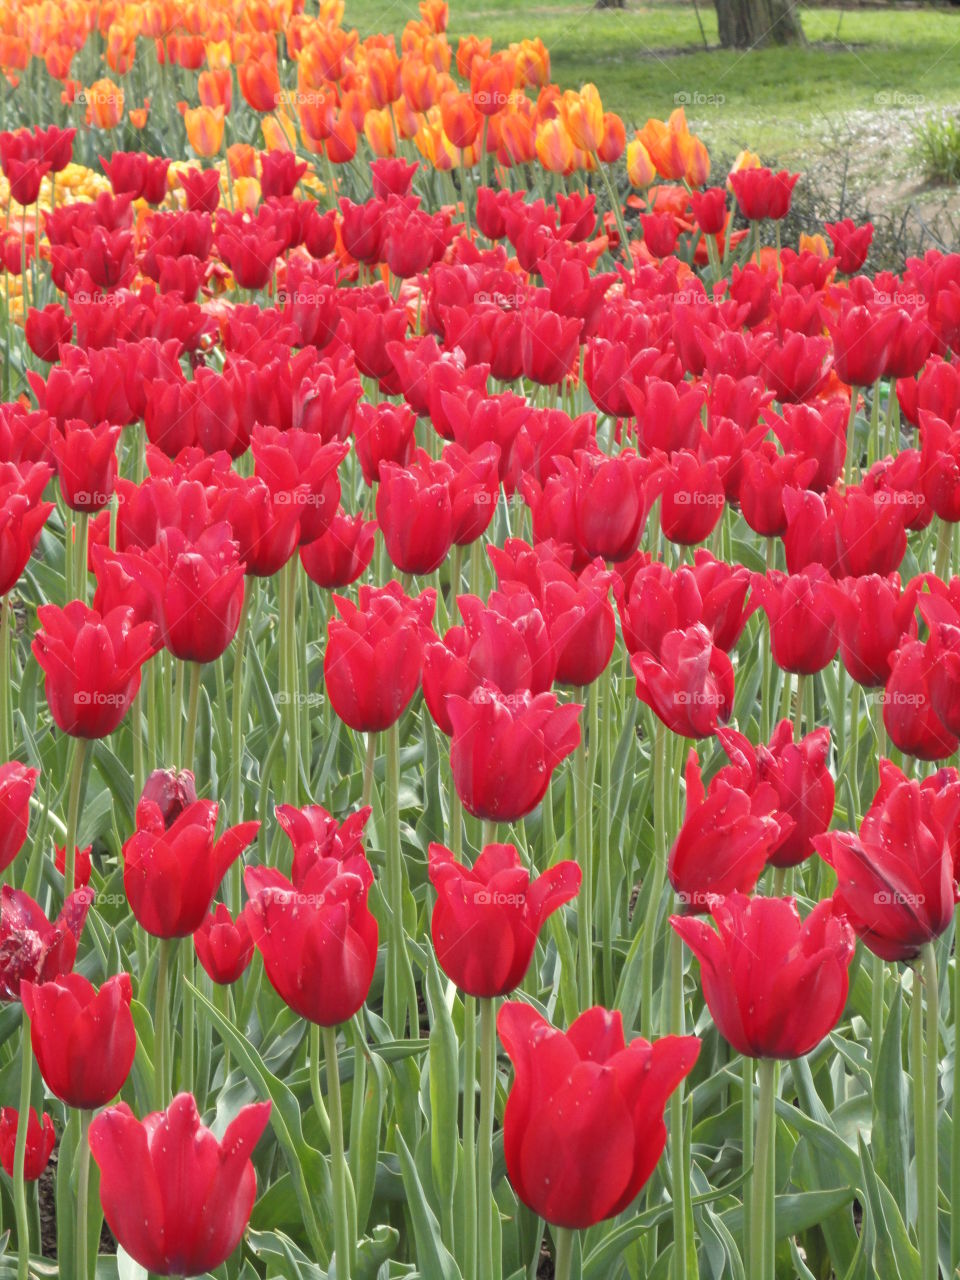 Spring in bloom. The color of love. Tulips filling hearts with happiness on a warm day.